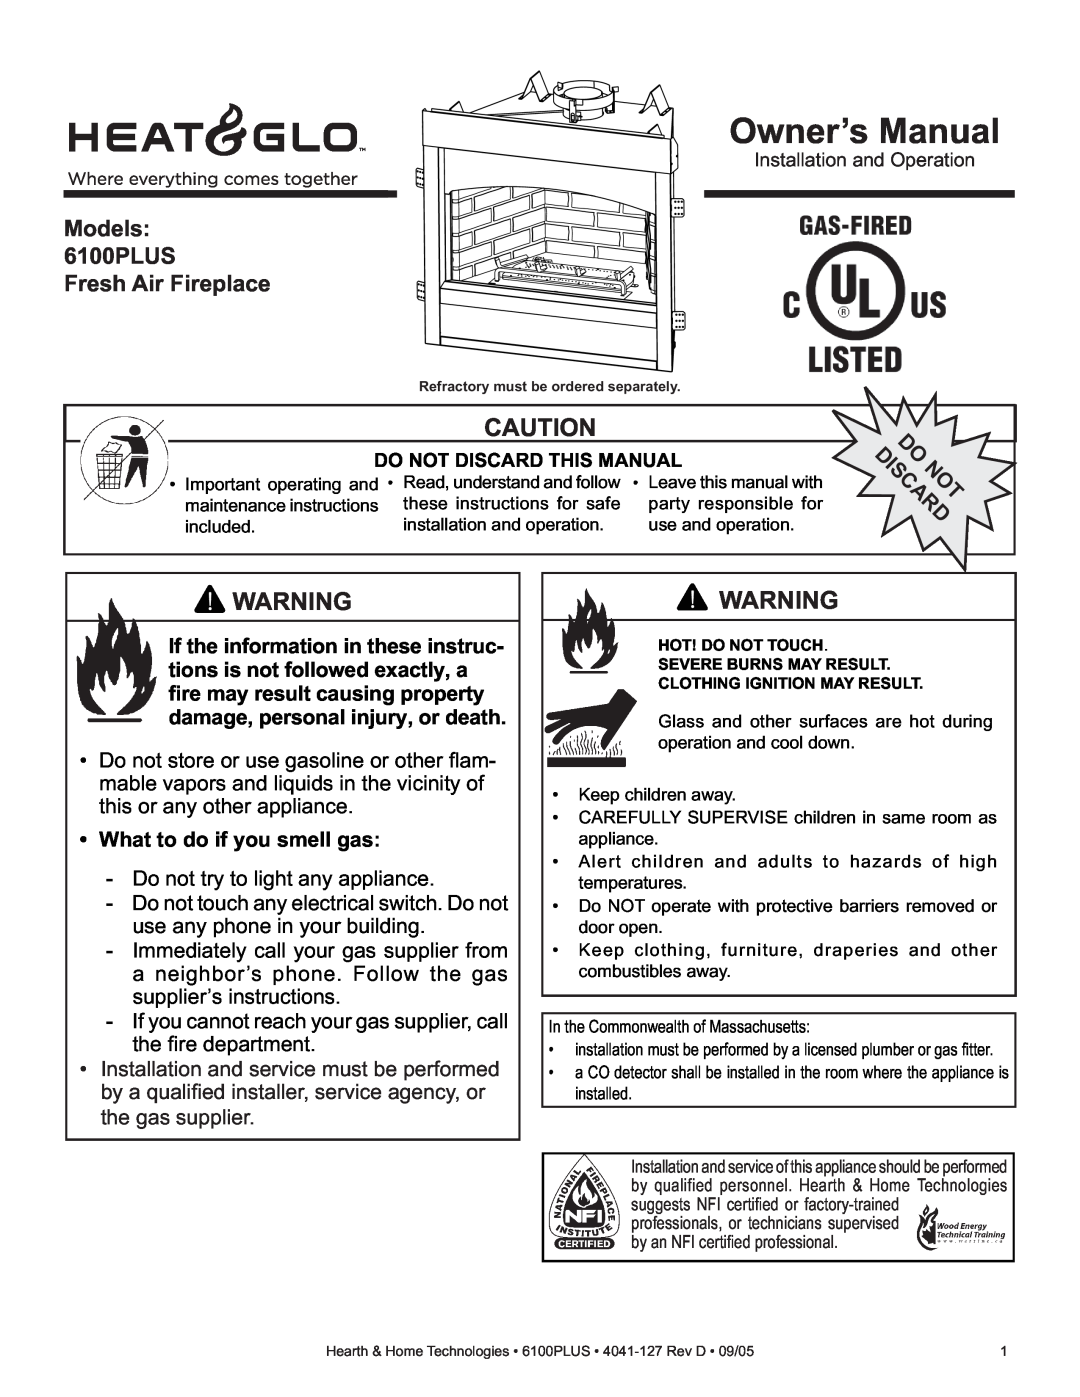 Heat & Glo LifeStyle owner manual What to do if you smell gas, Models 6100PLUS Fresh Air Fireplace 